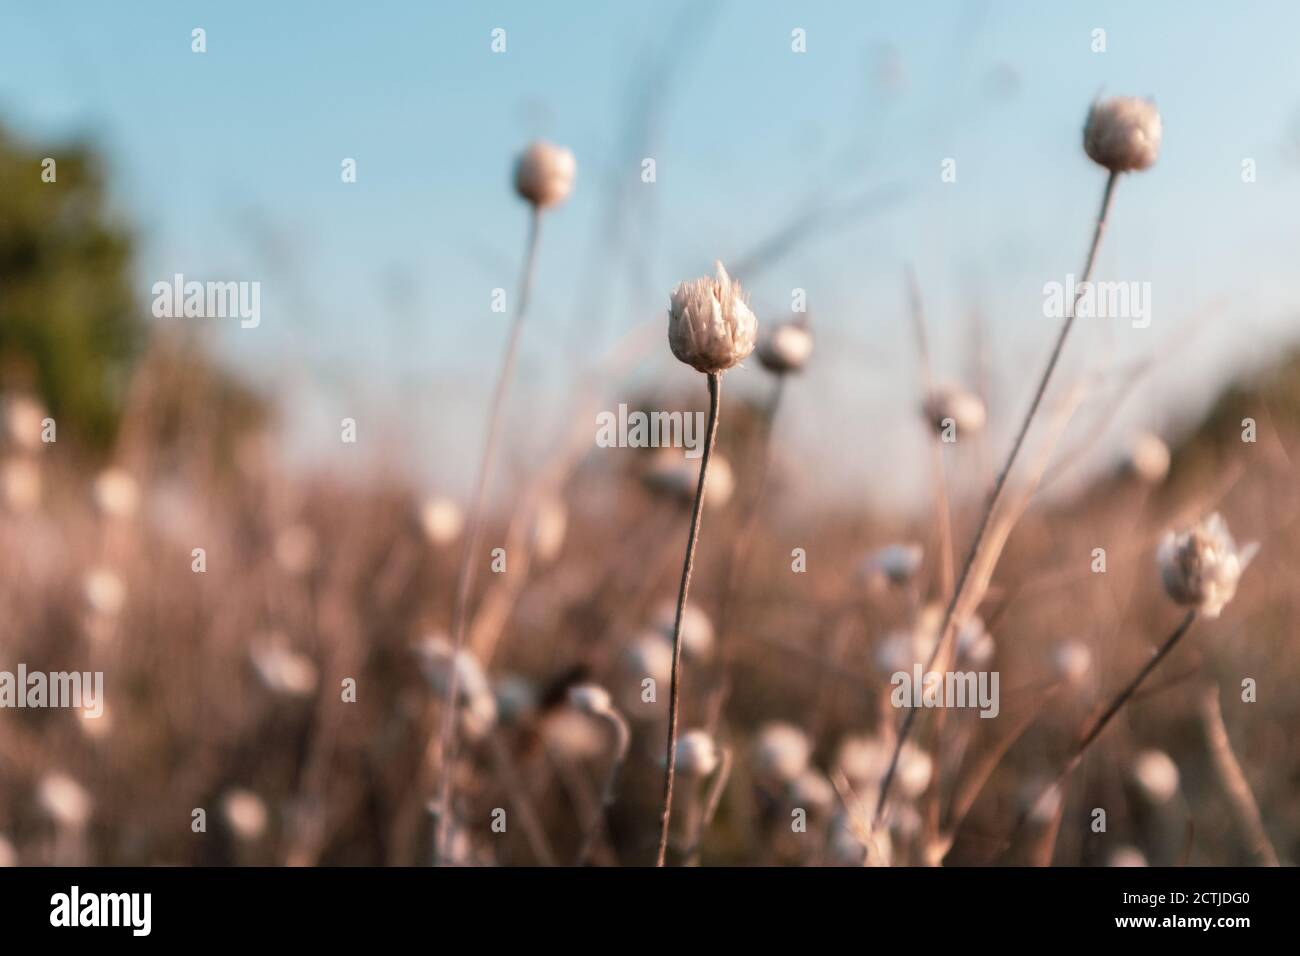 Dry wild onion grass with seeds in orange field with clear blue sky in sunset warm colors Stock Photo